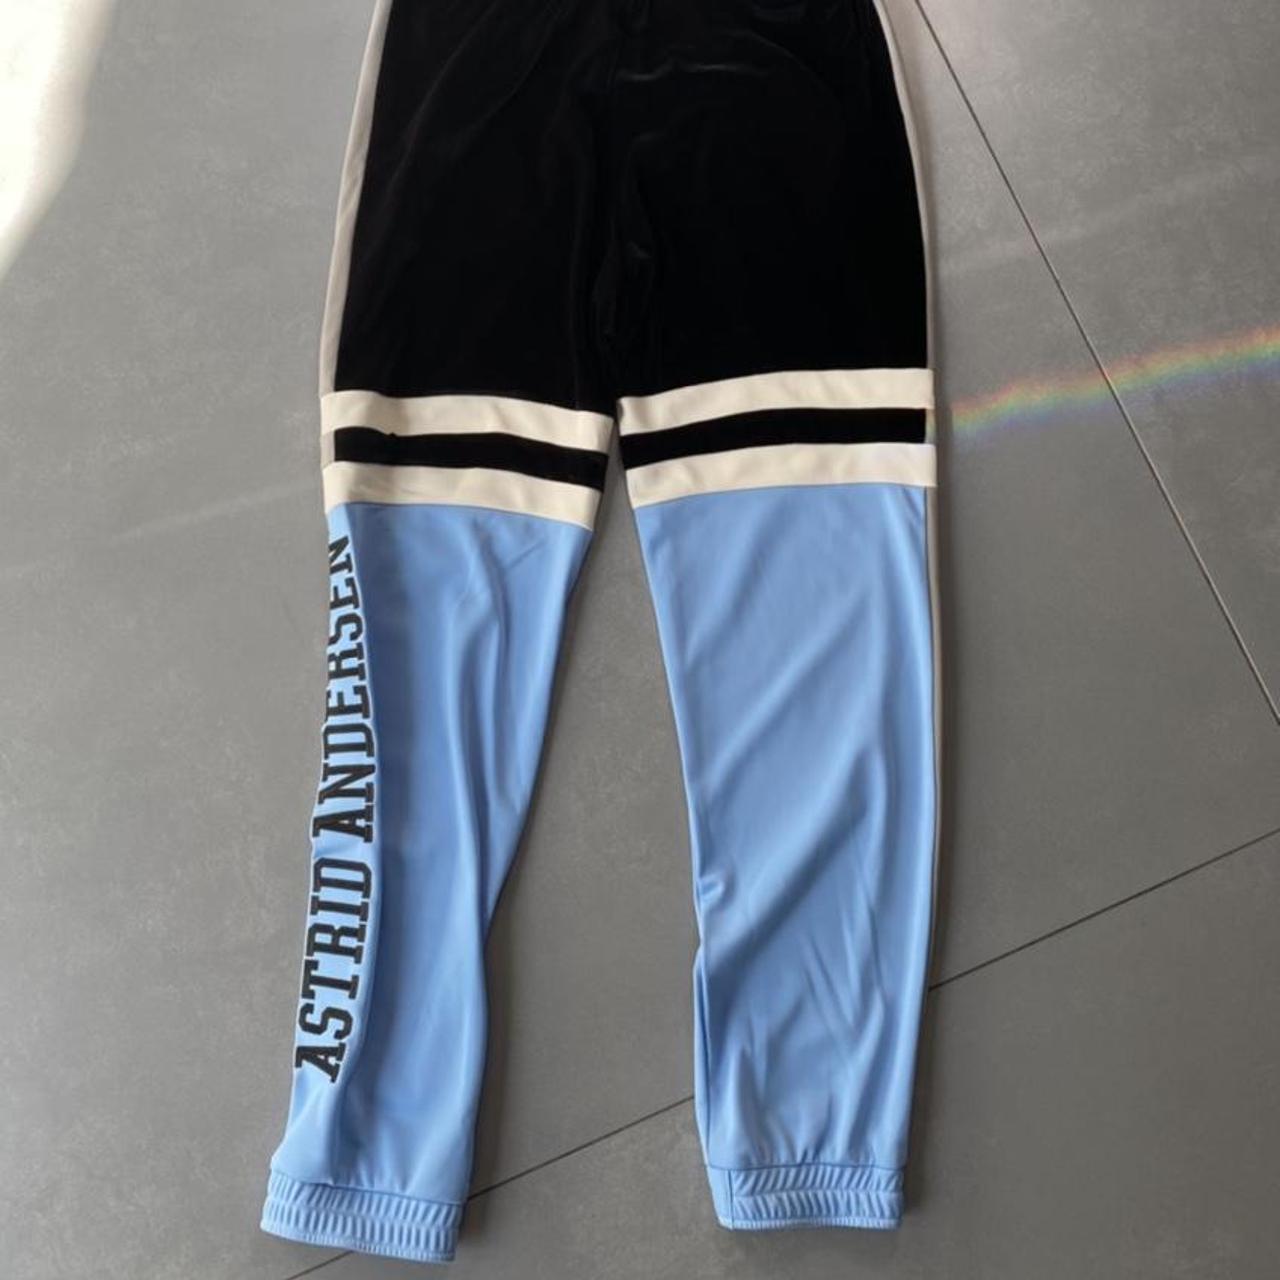 Astrid Andersen Men's Black and Blue Joggers-tracksuits (3)